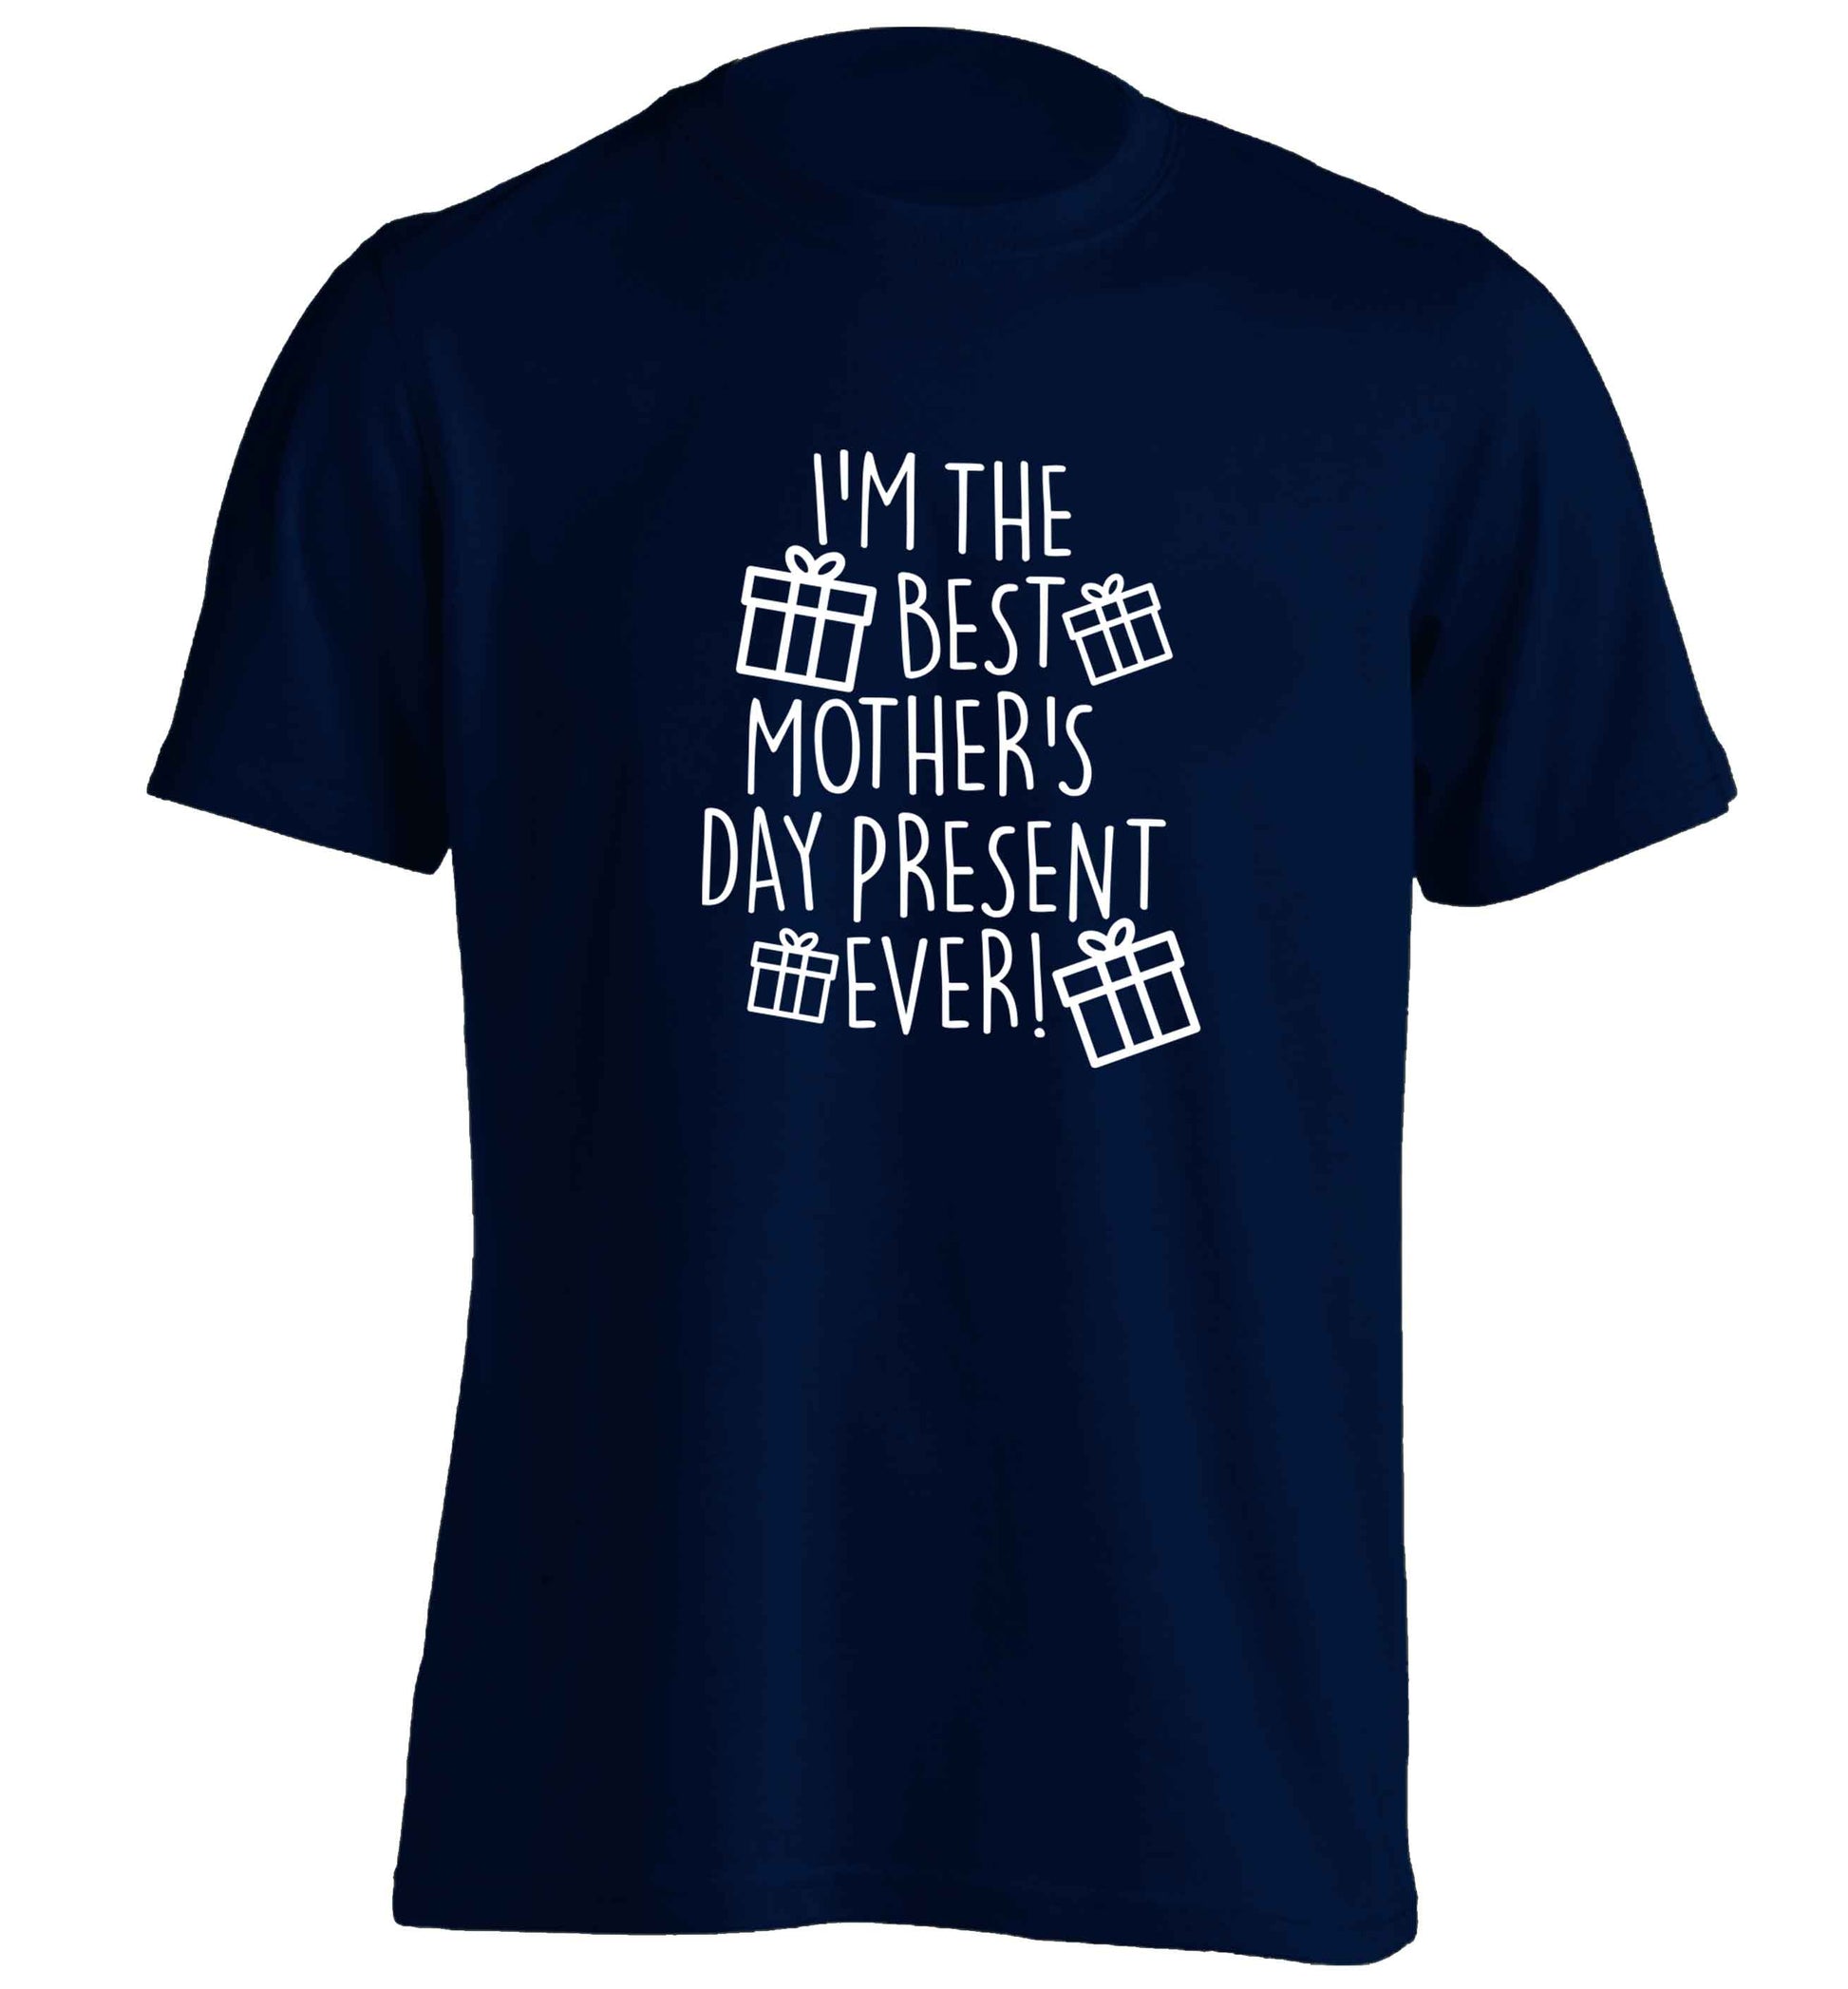 I'm the best mother's day present ever! adults unisex navy Tshirt 2XL